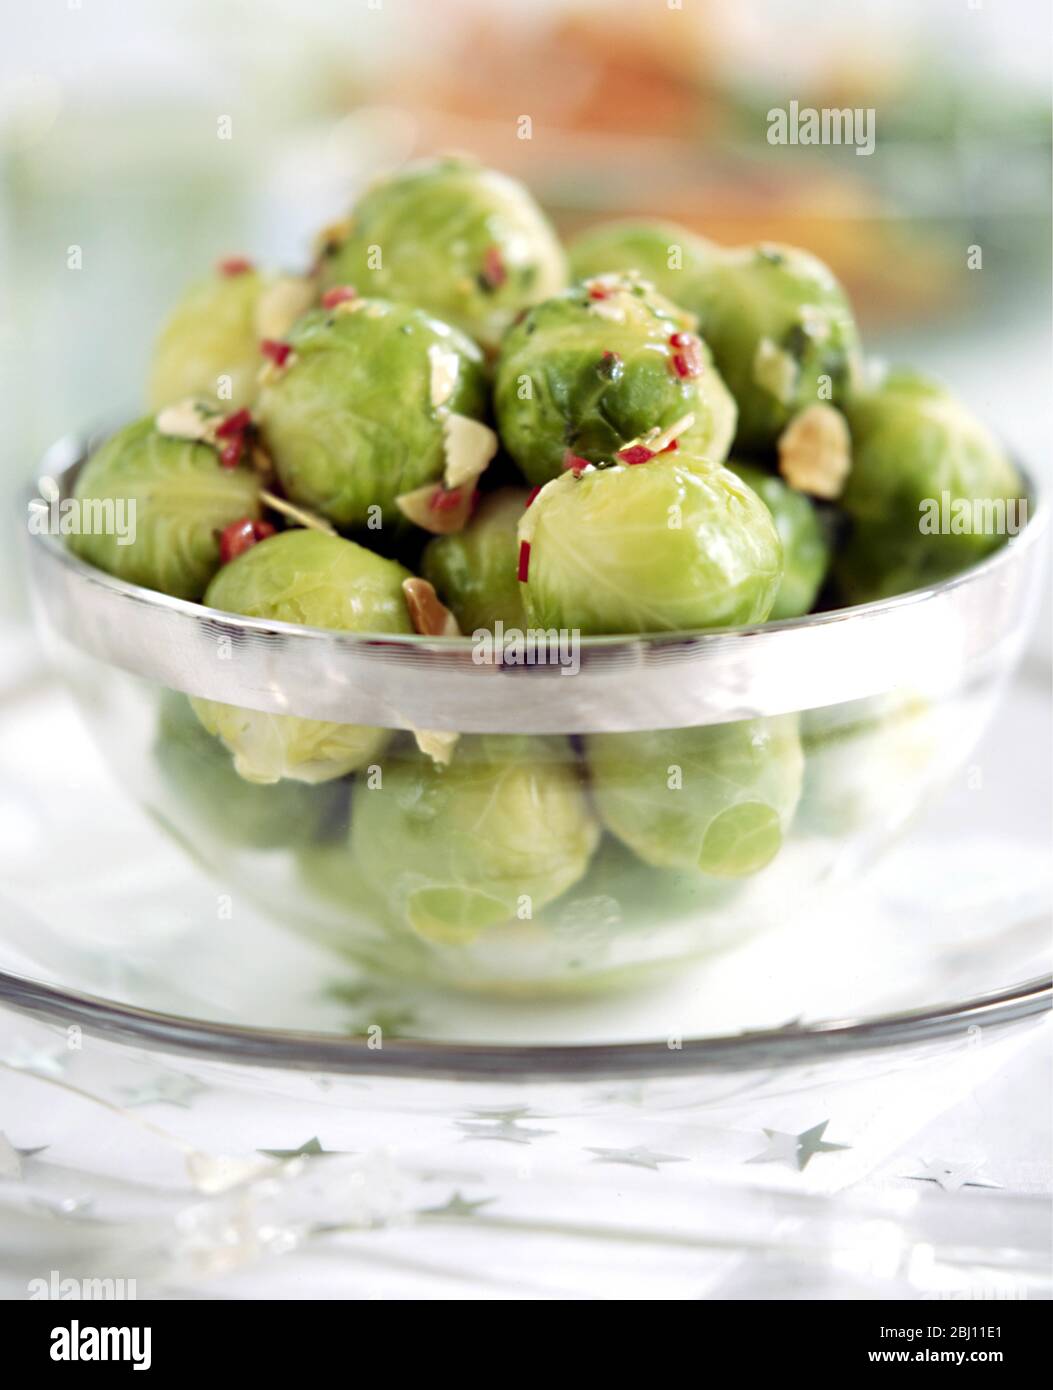 Brussels sprouts with flaked almonds and chili pepper garnish - Stock Photo